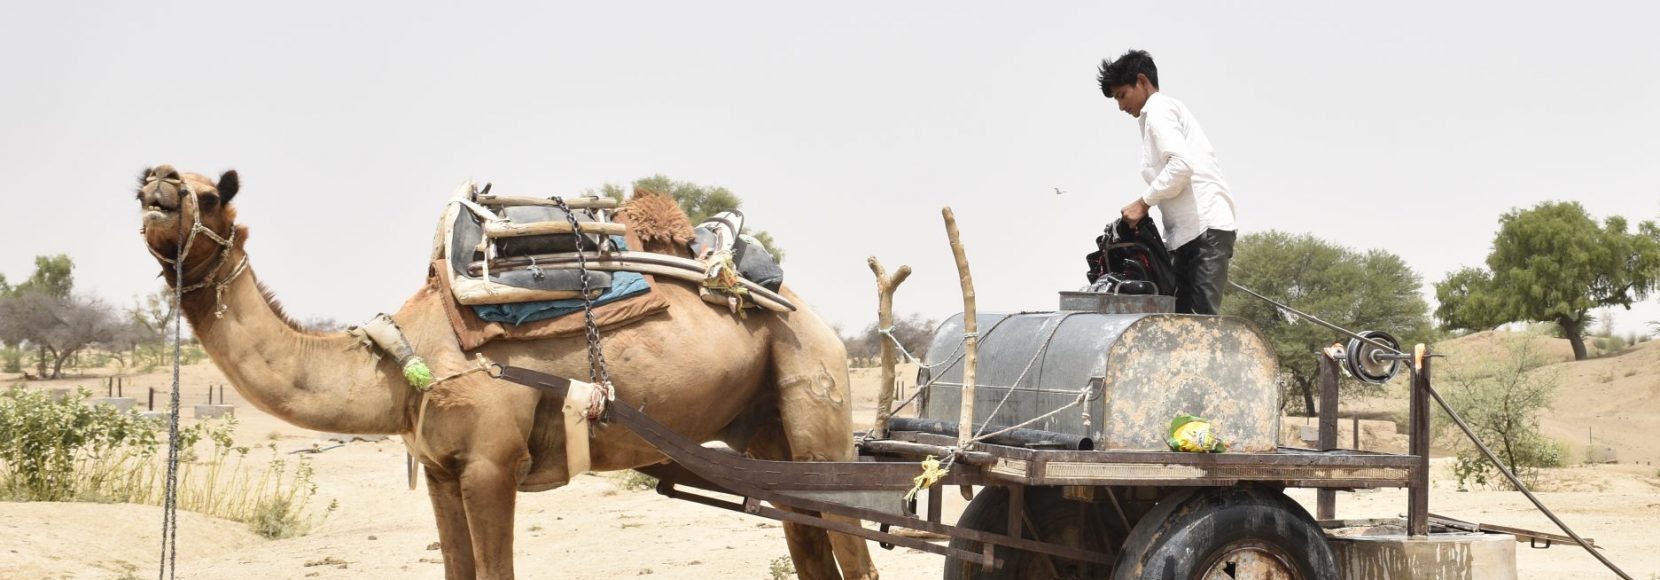 farmers-in-India-use-camel-to-draw-water-heat-wave